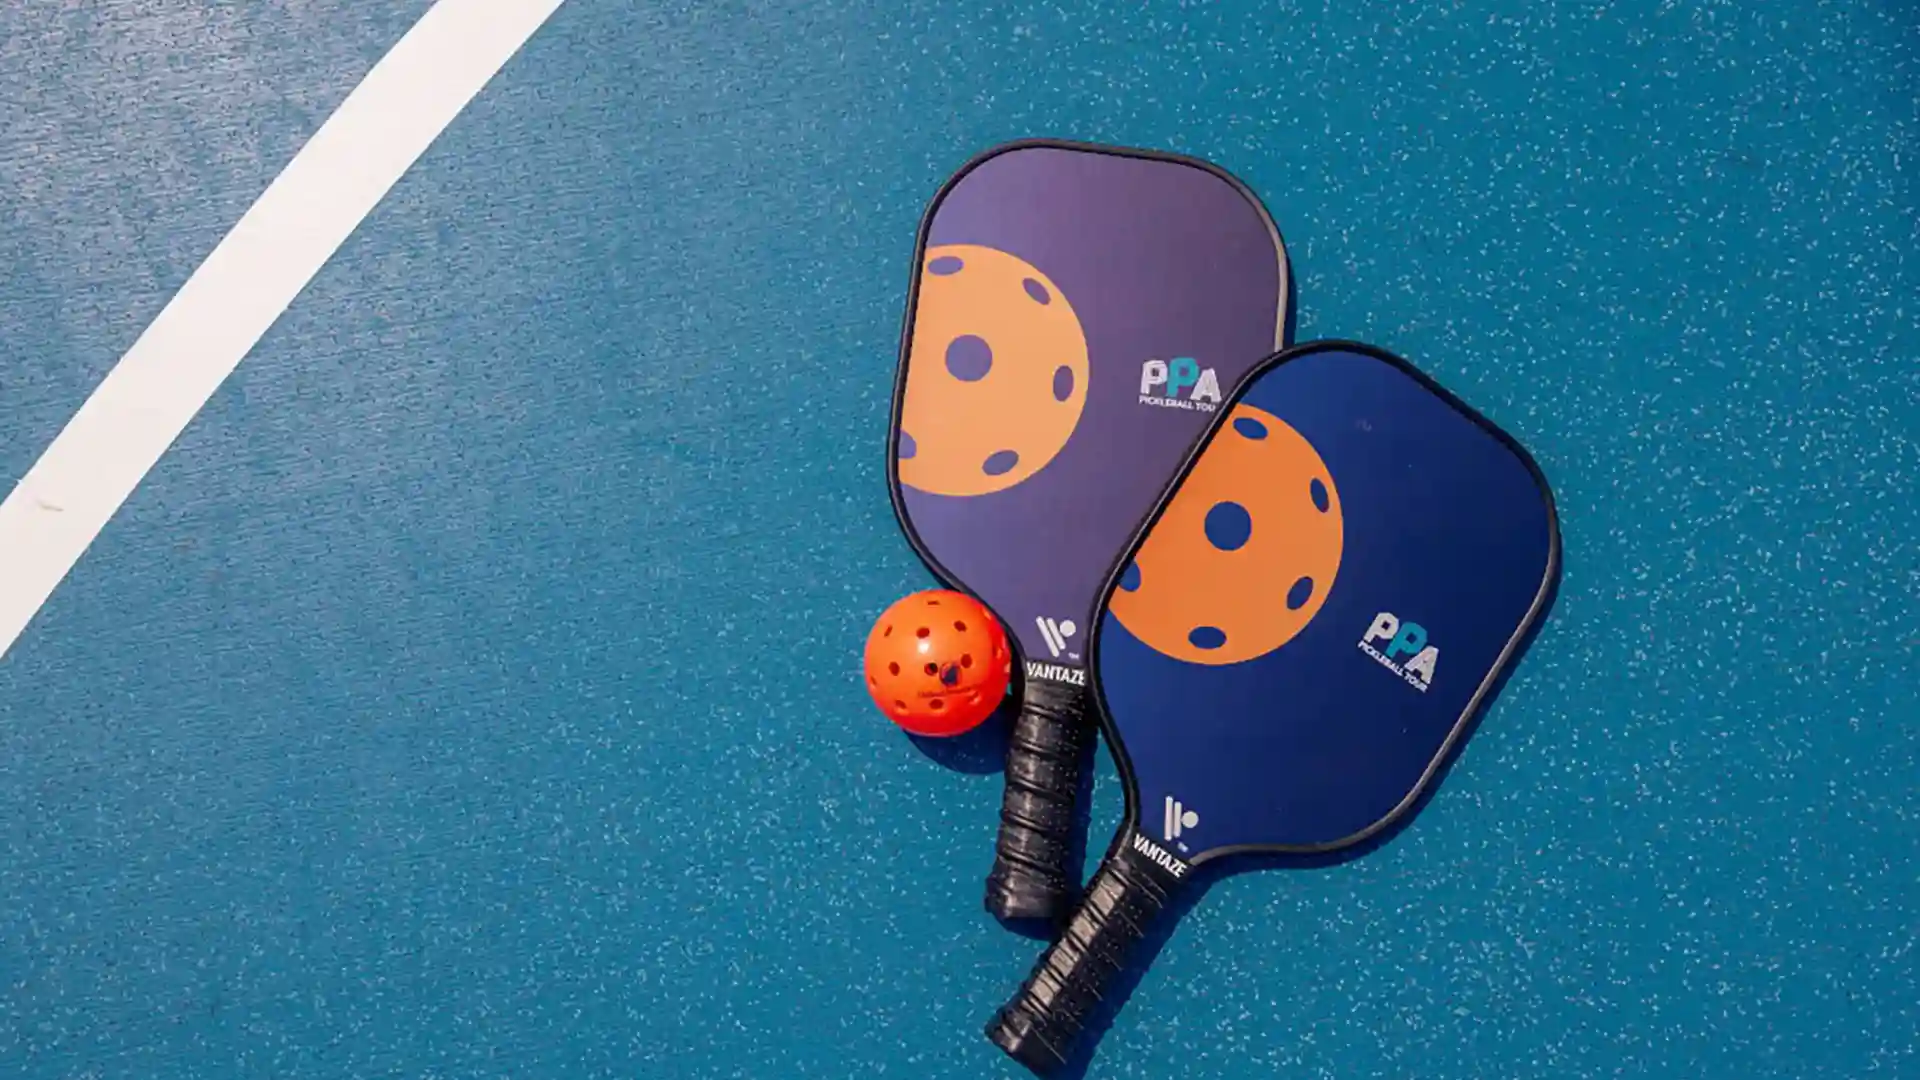 Post: Join Us in Seattle for the Professional Pickleball Association Tour Stop, Enter Cruise Sweepstakes